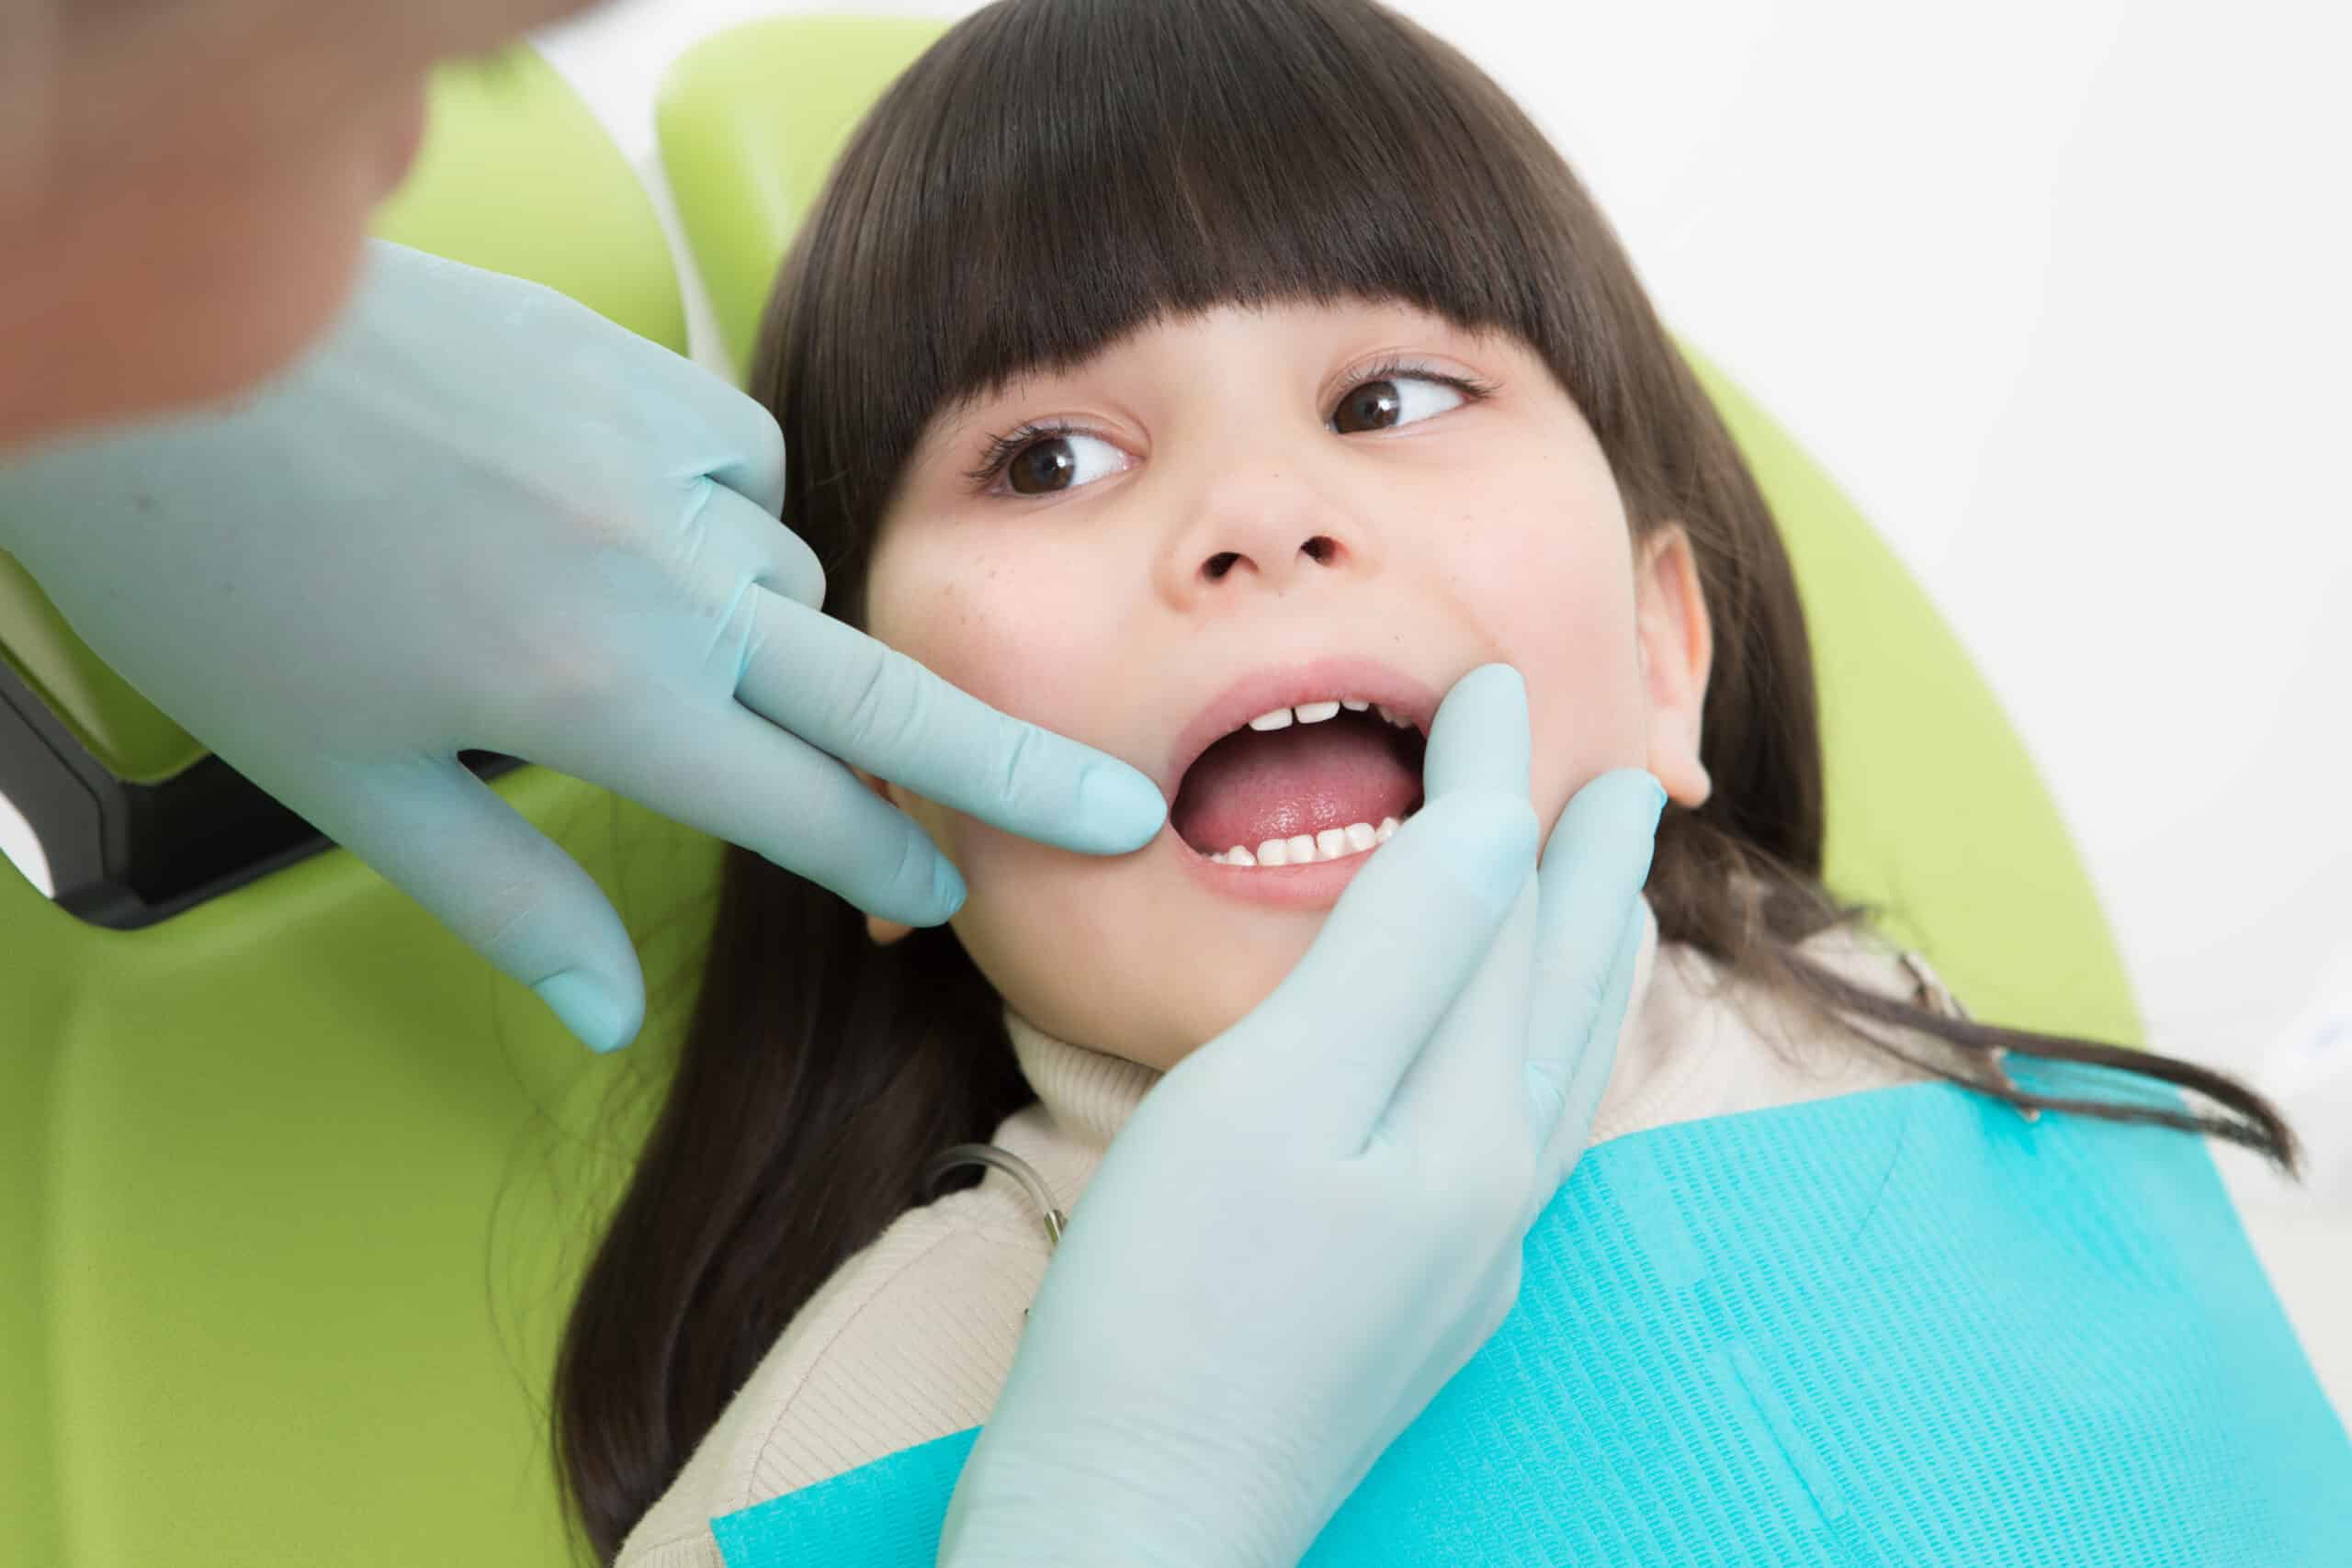 What Do Dentists Do When You Have a Cavity?